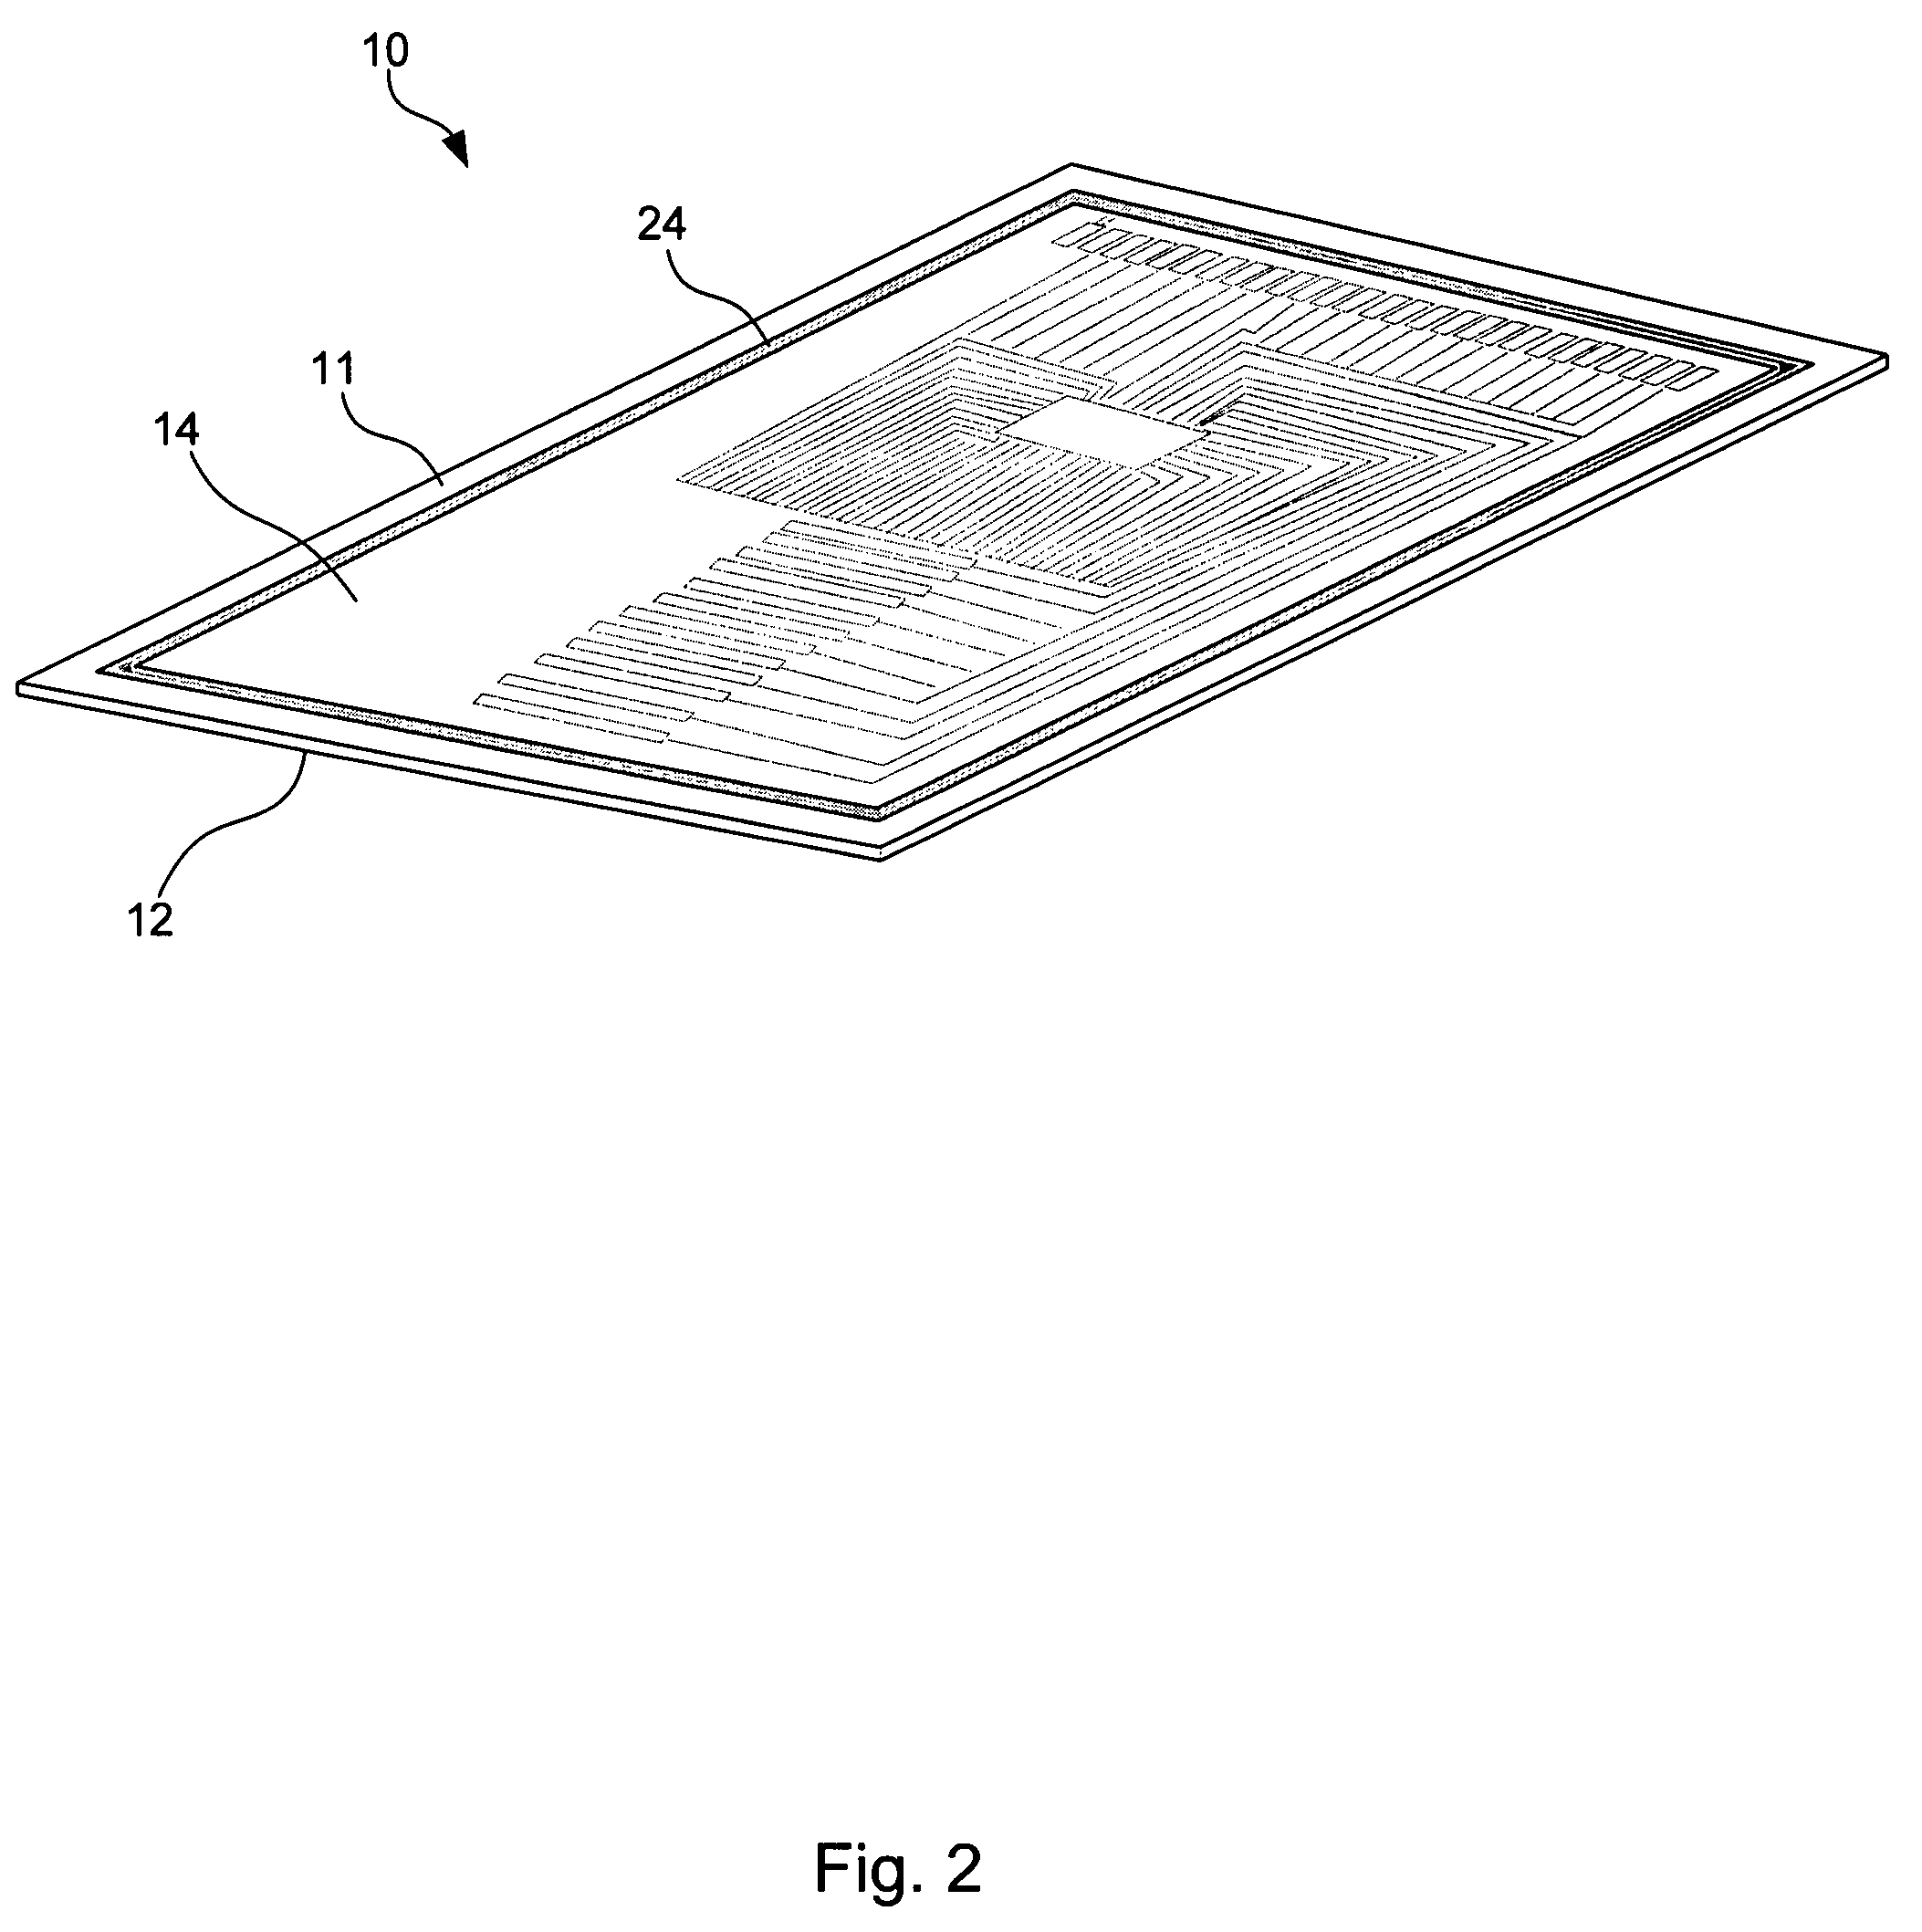 Apparatus and method for protecting fingerprint sensing circuitry from electrostatic discharge